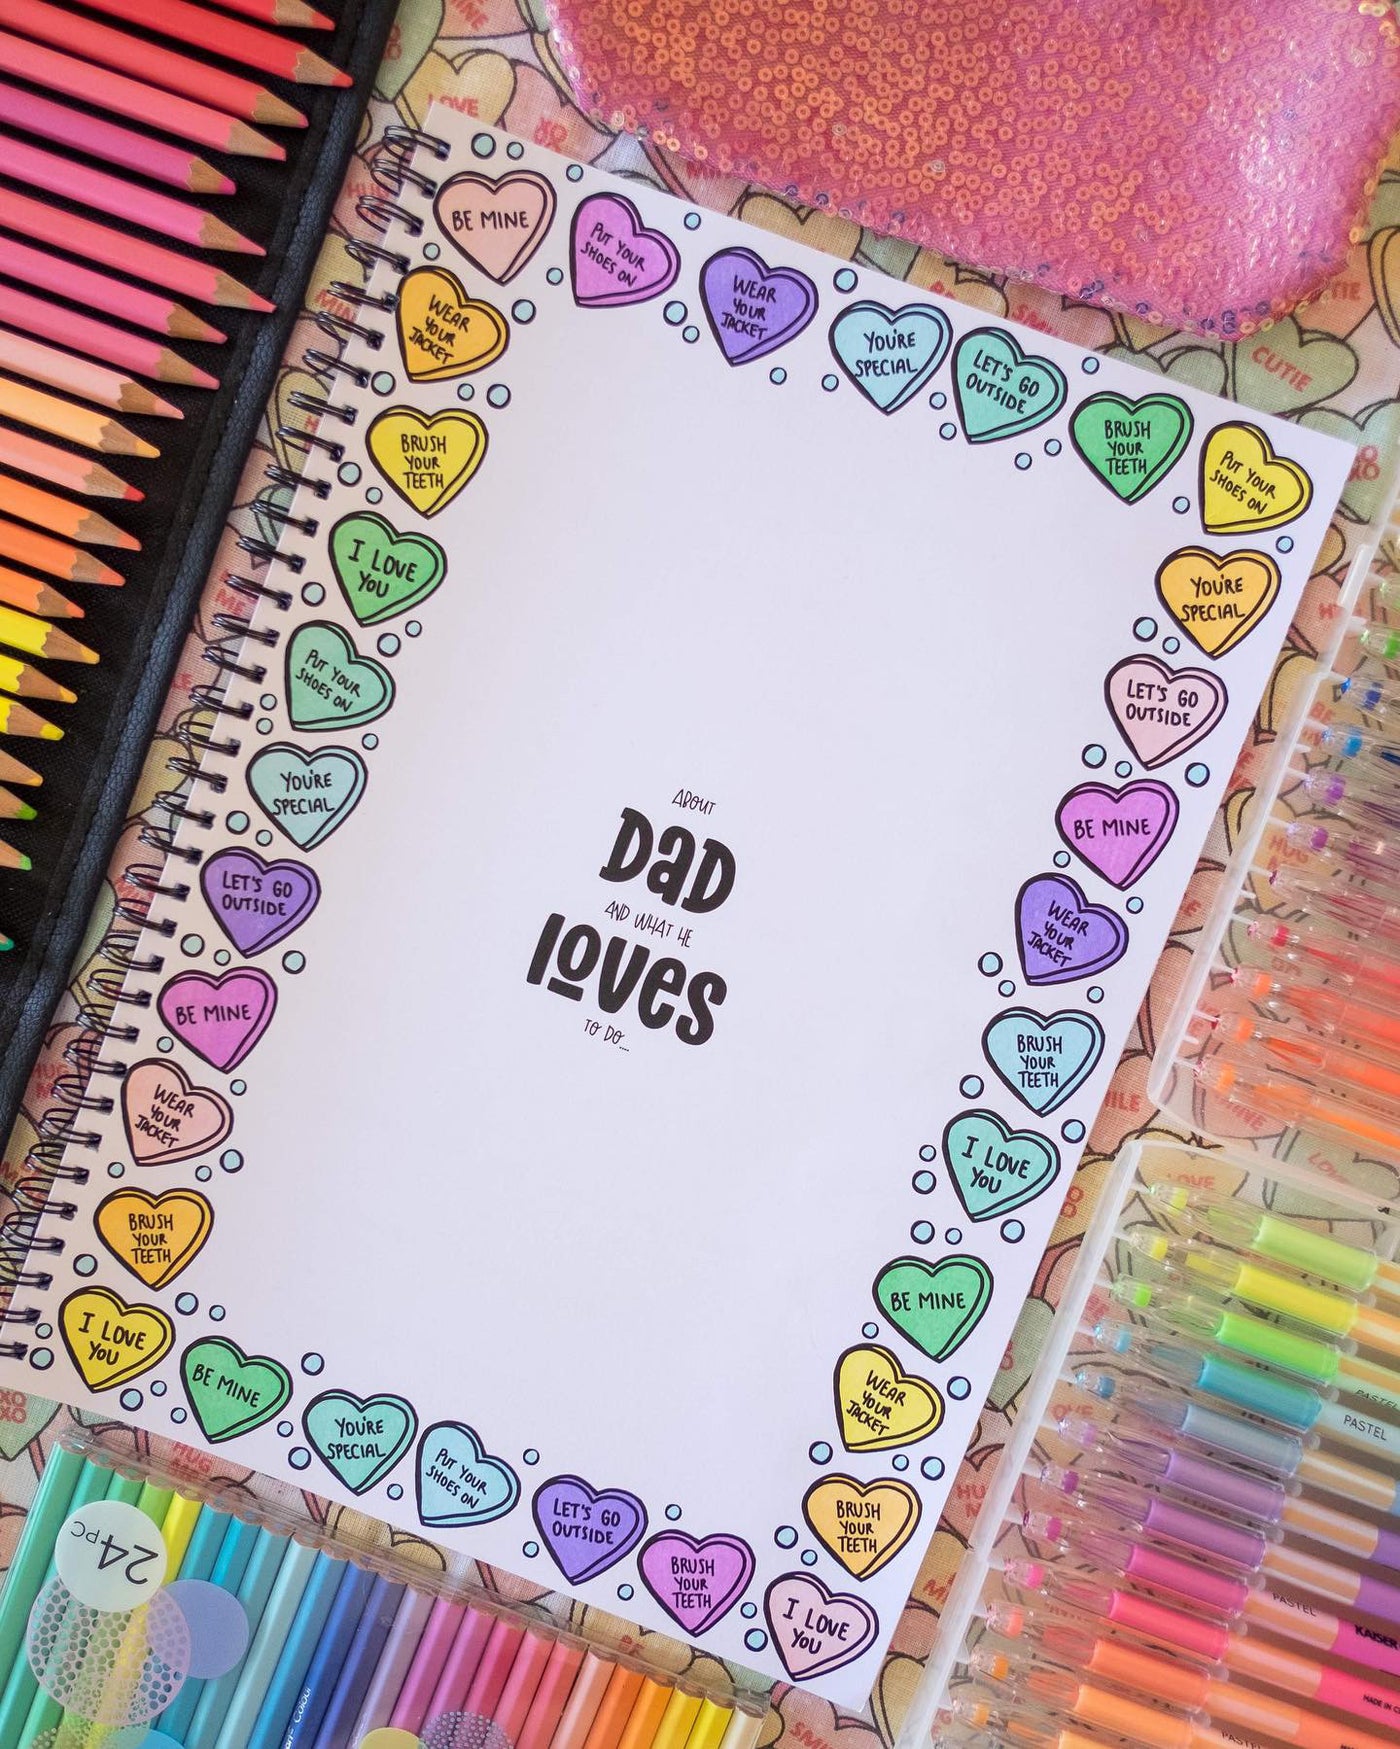 Adventures with Dad - A Memory Book for Dad and his Mini-Me | Blueberry Co